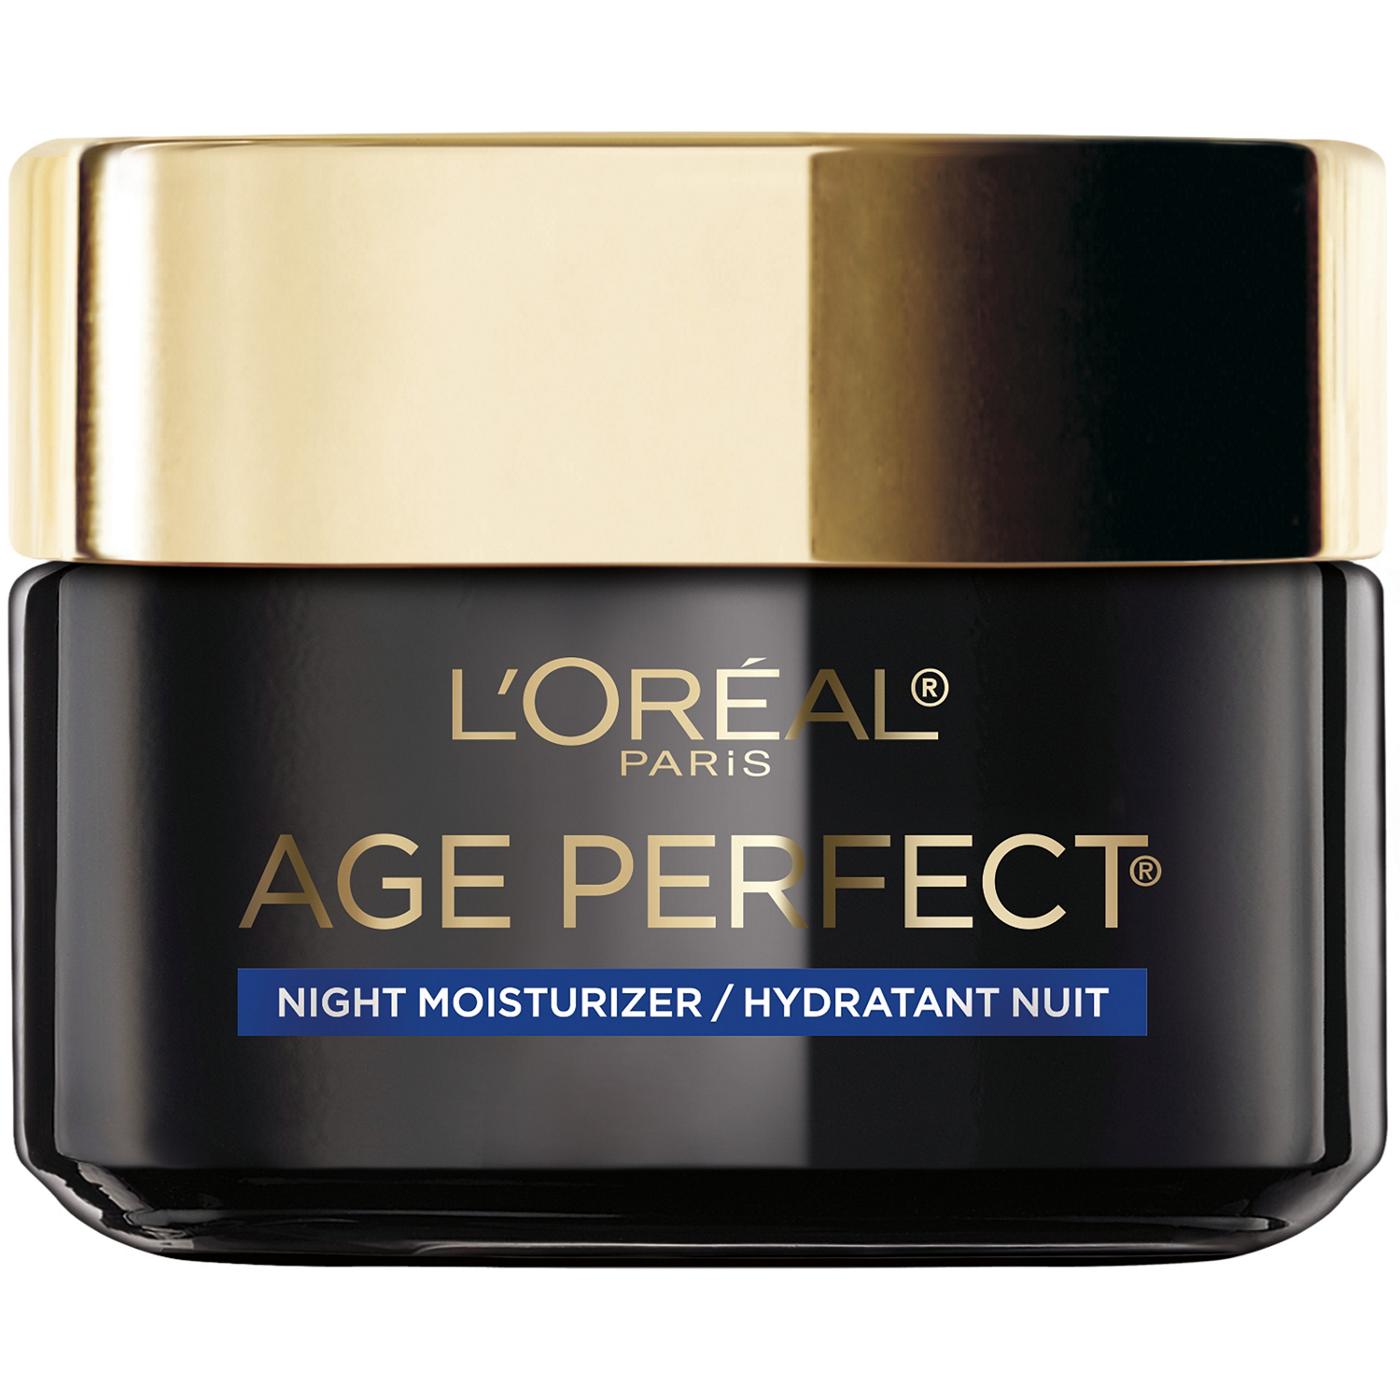 L'Oréal Paris Age Perfect Cell Renewal Anti-Aging Night Moisturizer; image 4 of 5